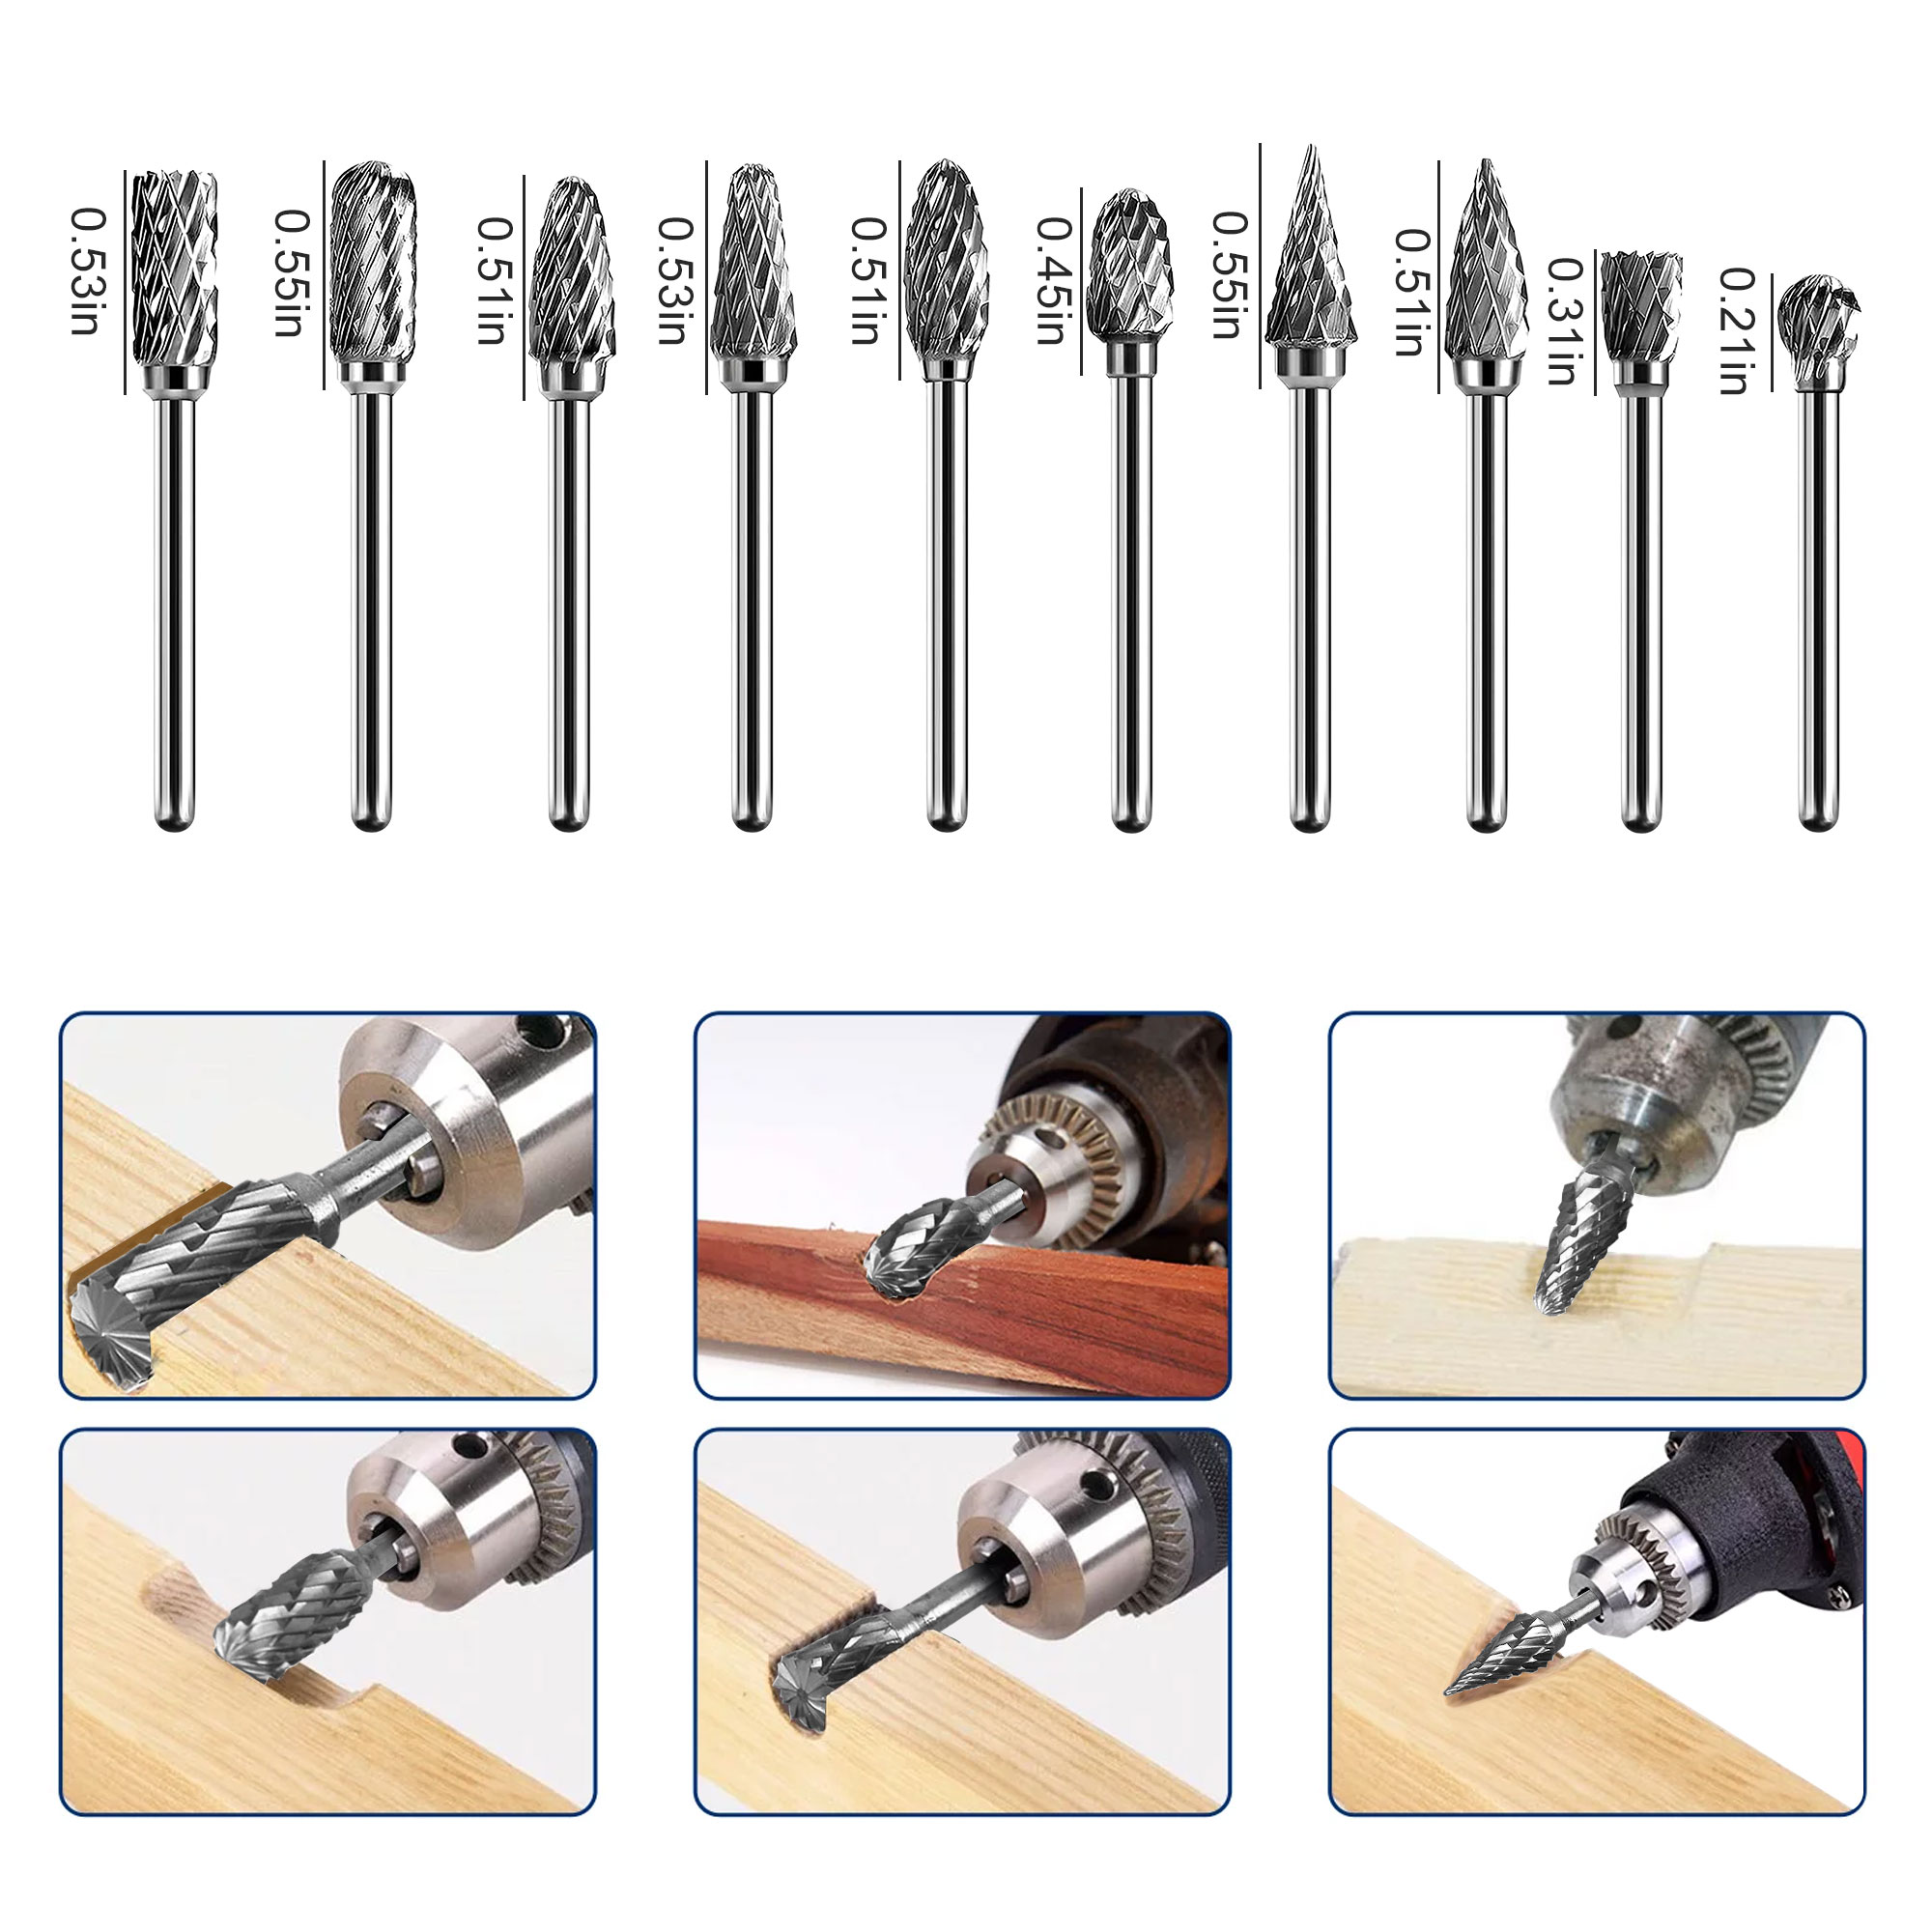 TSV 10pcs Carbide Burrs Fit for Dremel, 1/8 Shank Double Cut Tungsten  Carbide Rotary Bits for Carving Engraving Polishing